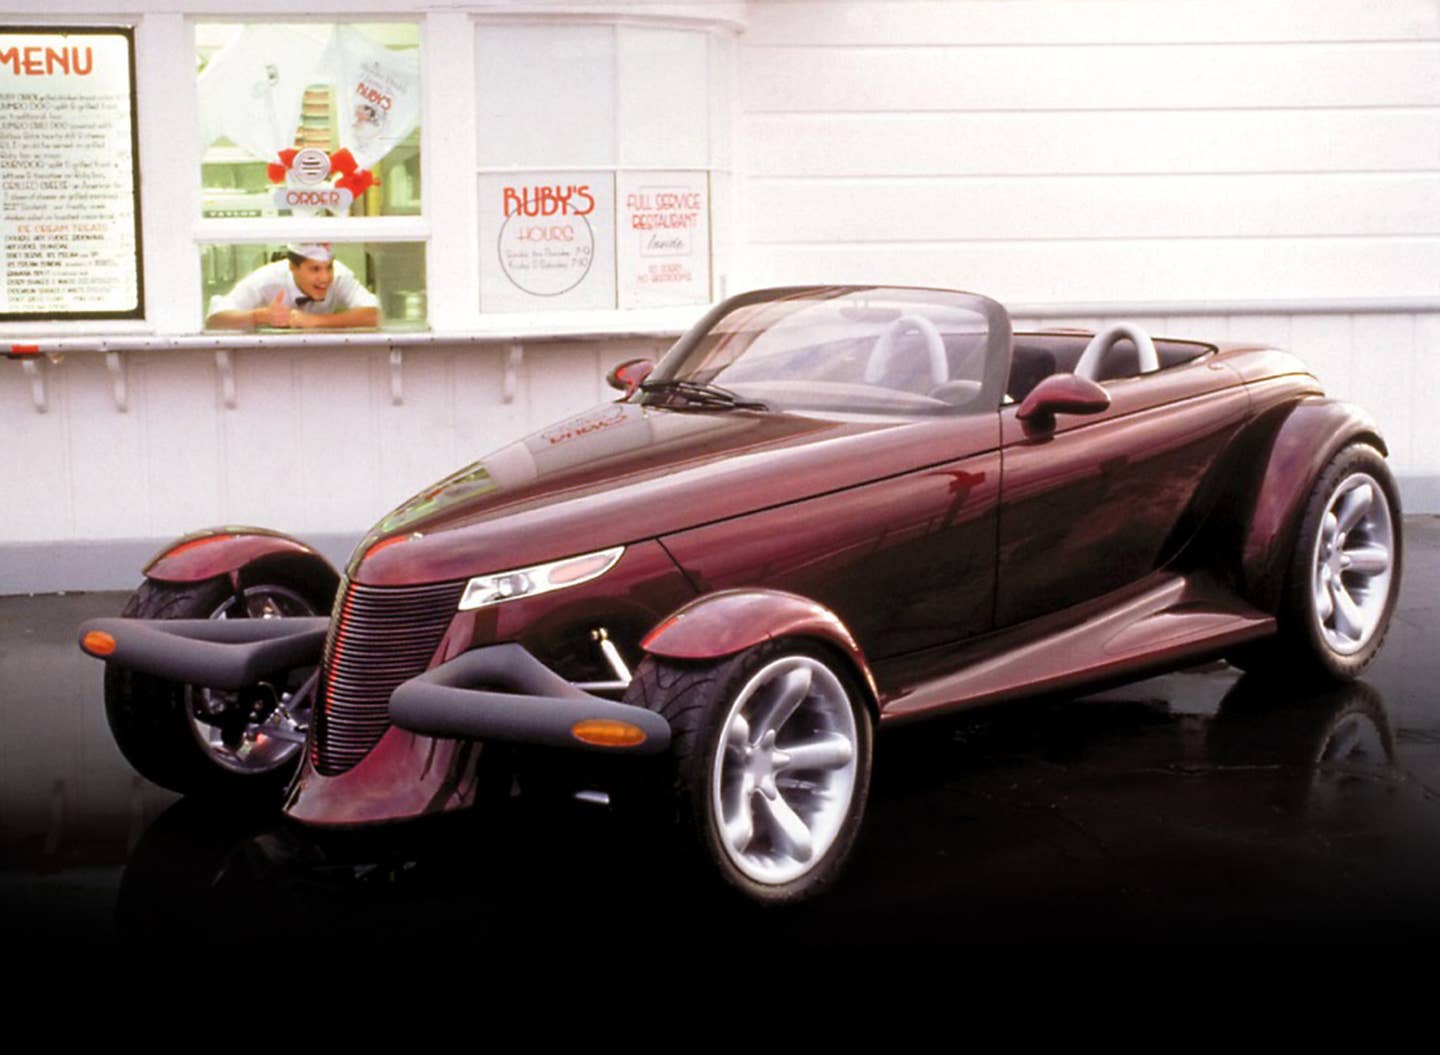 message-editor%2F1626072008405-plymouth_prowler_concept_4.jpeg